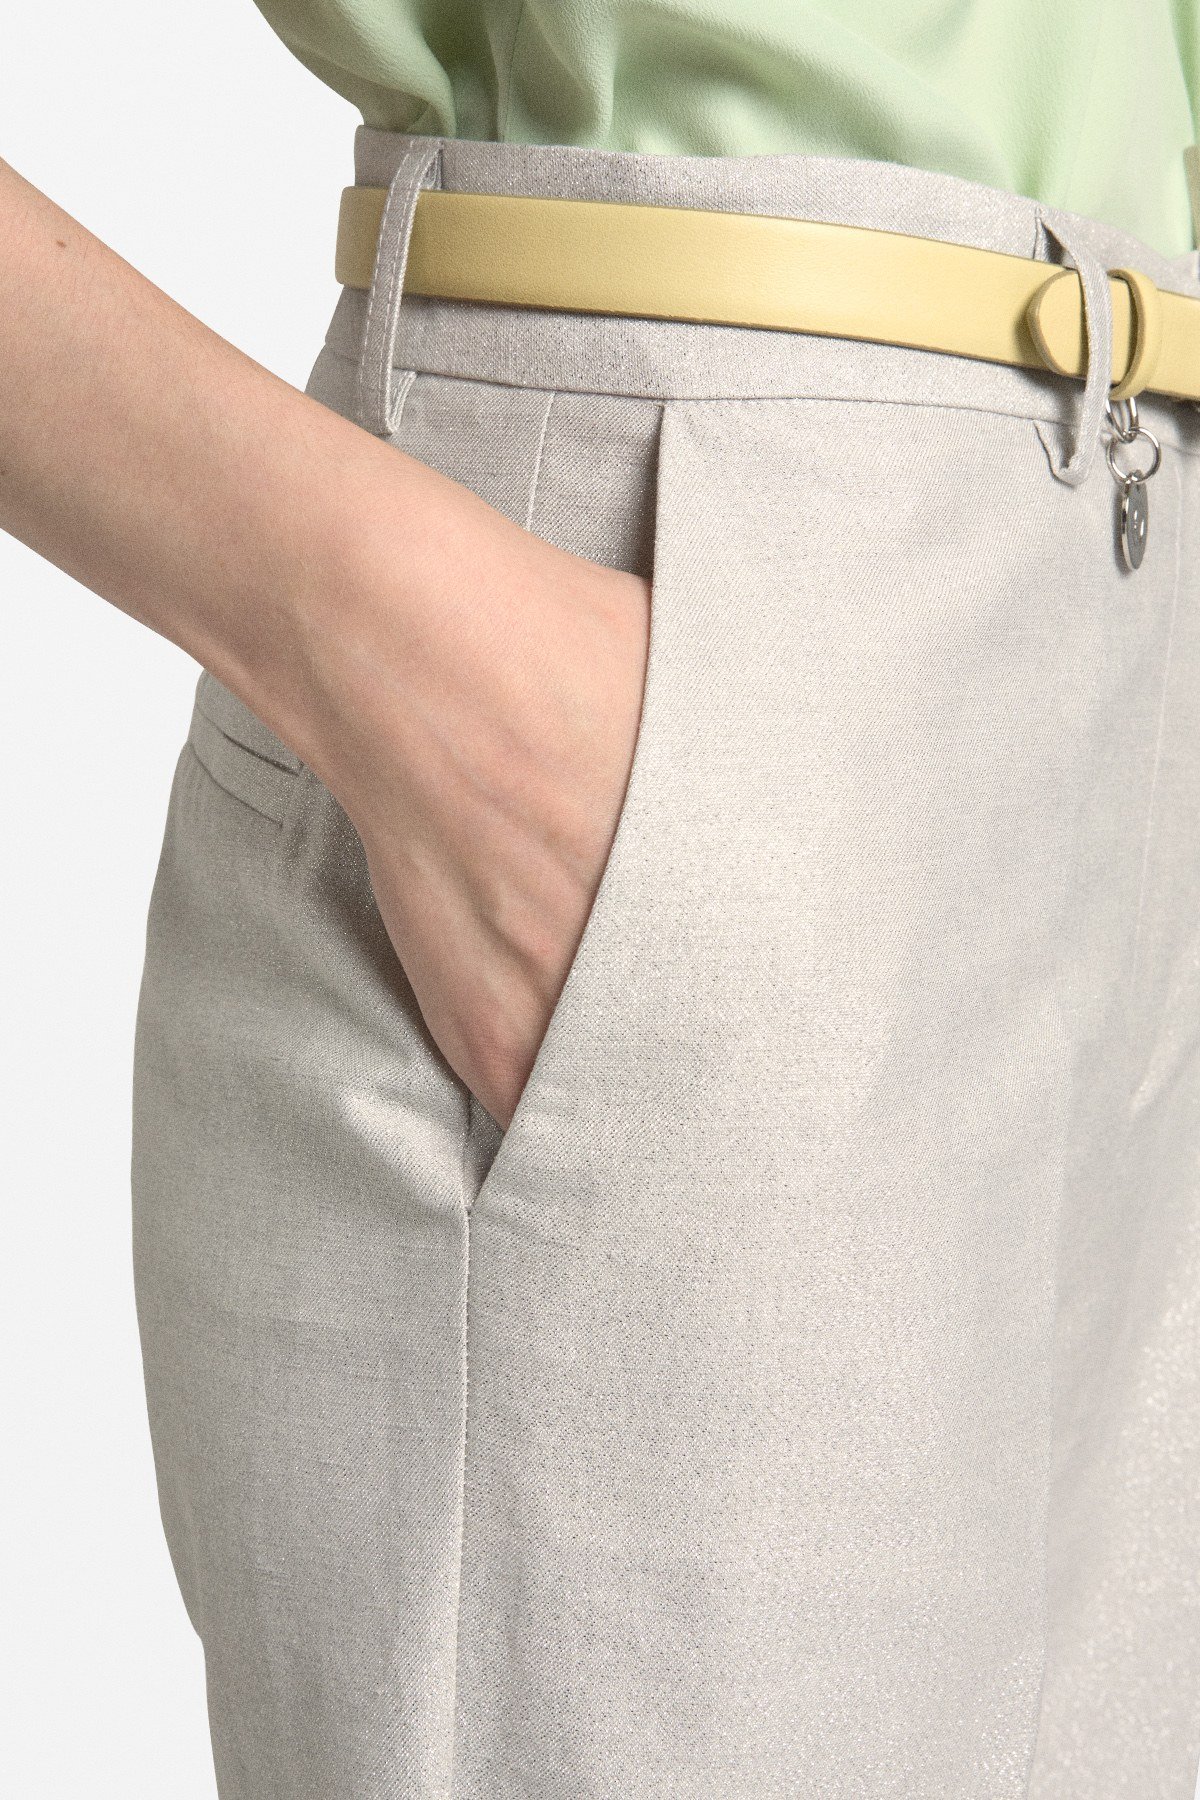 Linen blend palazzo trousers